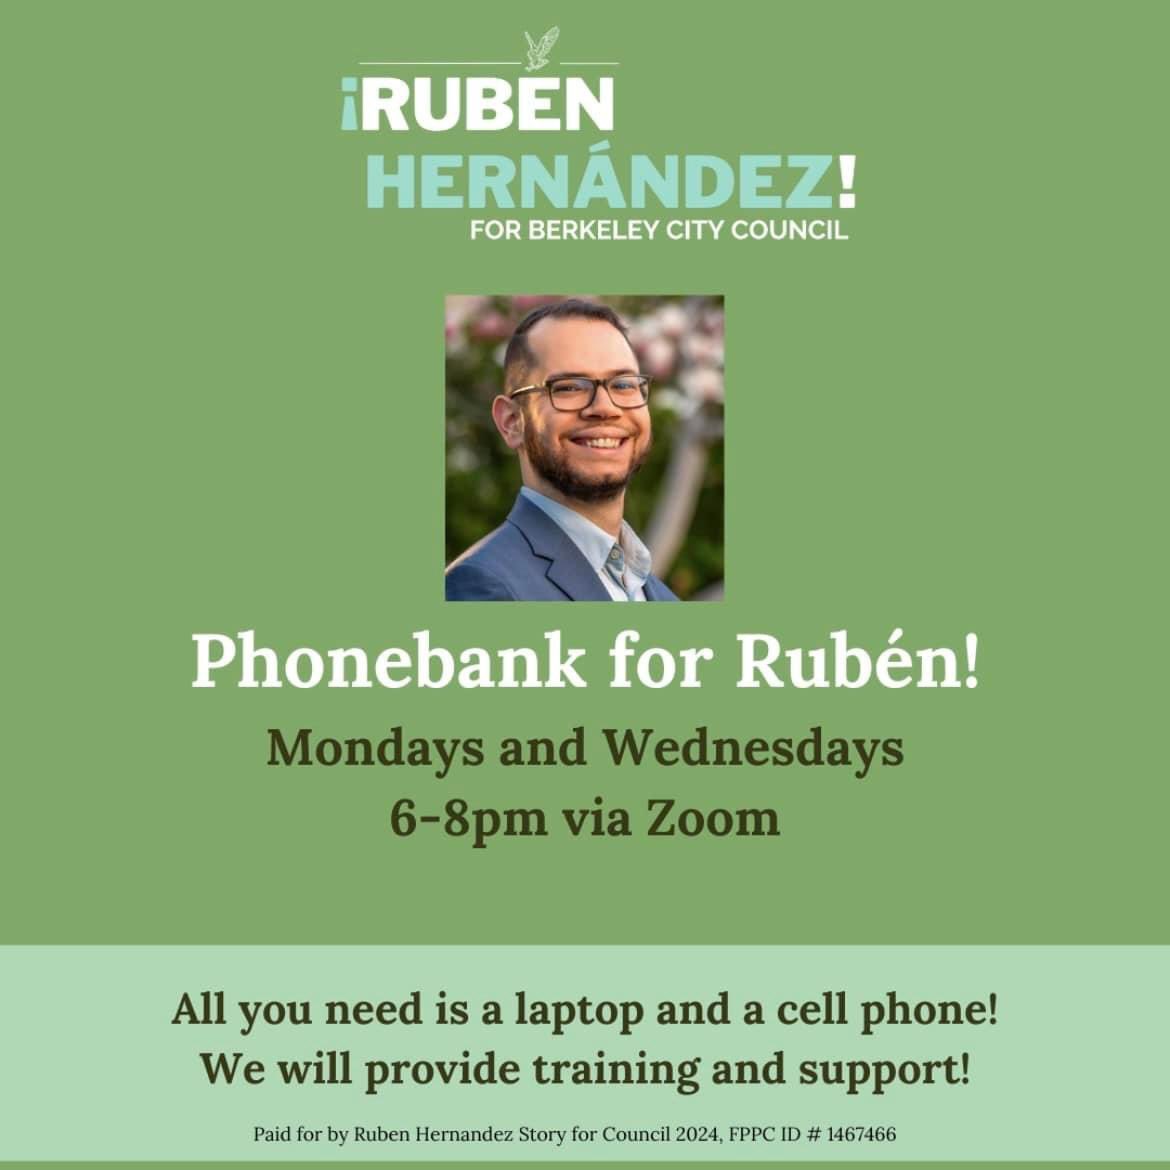 We will be canvassing every Saturday & Sunday from 10 am to 2 pm & phone banking every Monday & Wednesday from 6 to 8 pm. Can’t make those times? We can set you up for individual outreach! #ruben4berkeley 🦉 Volunteer: bit.ly/RHSD4VOL Donate: bit.ly/RubenD4